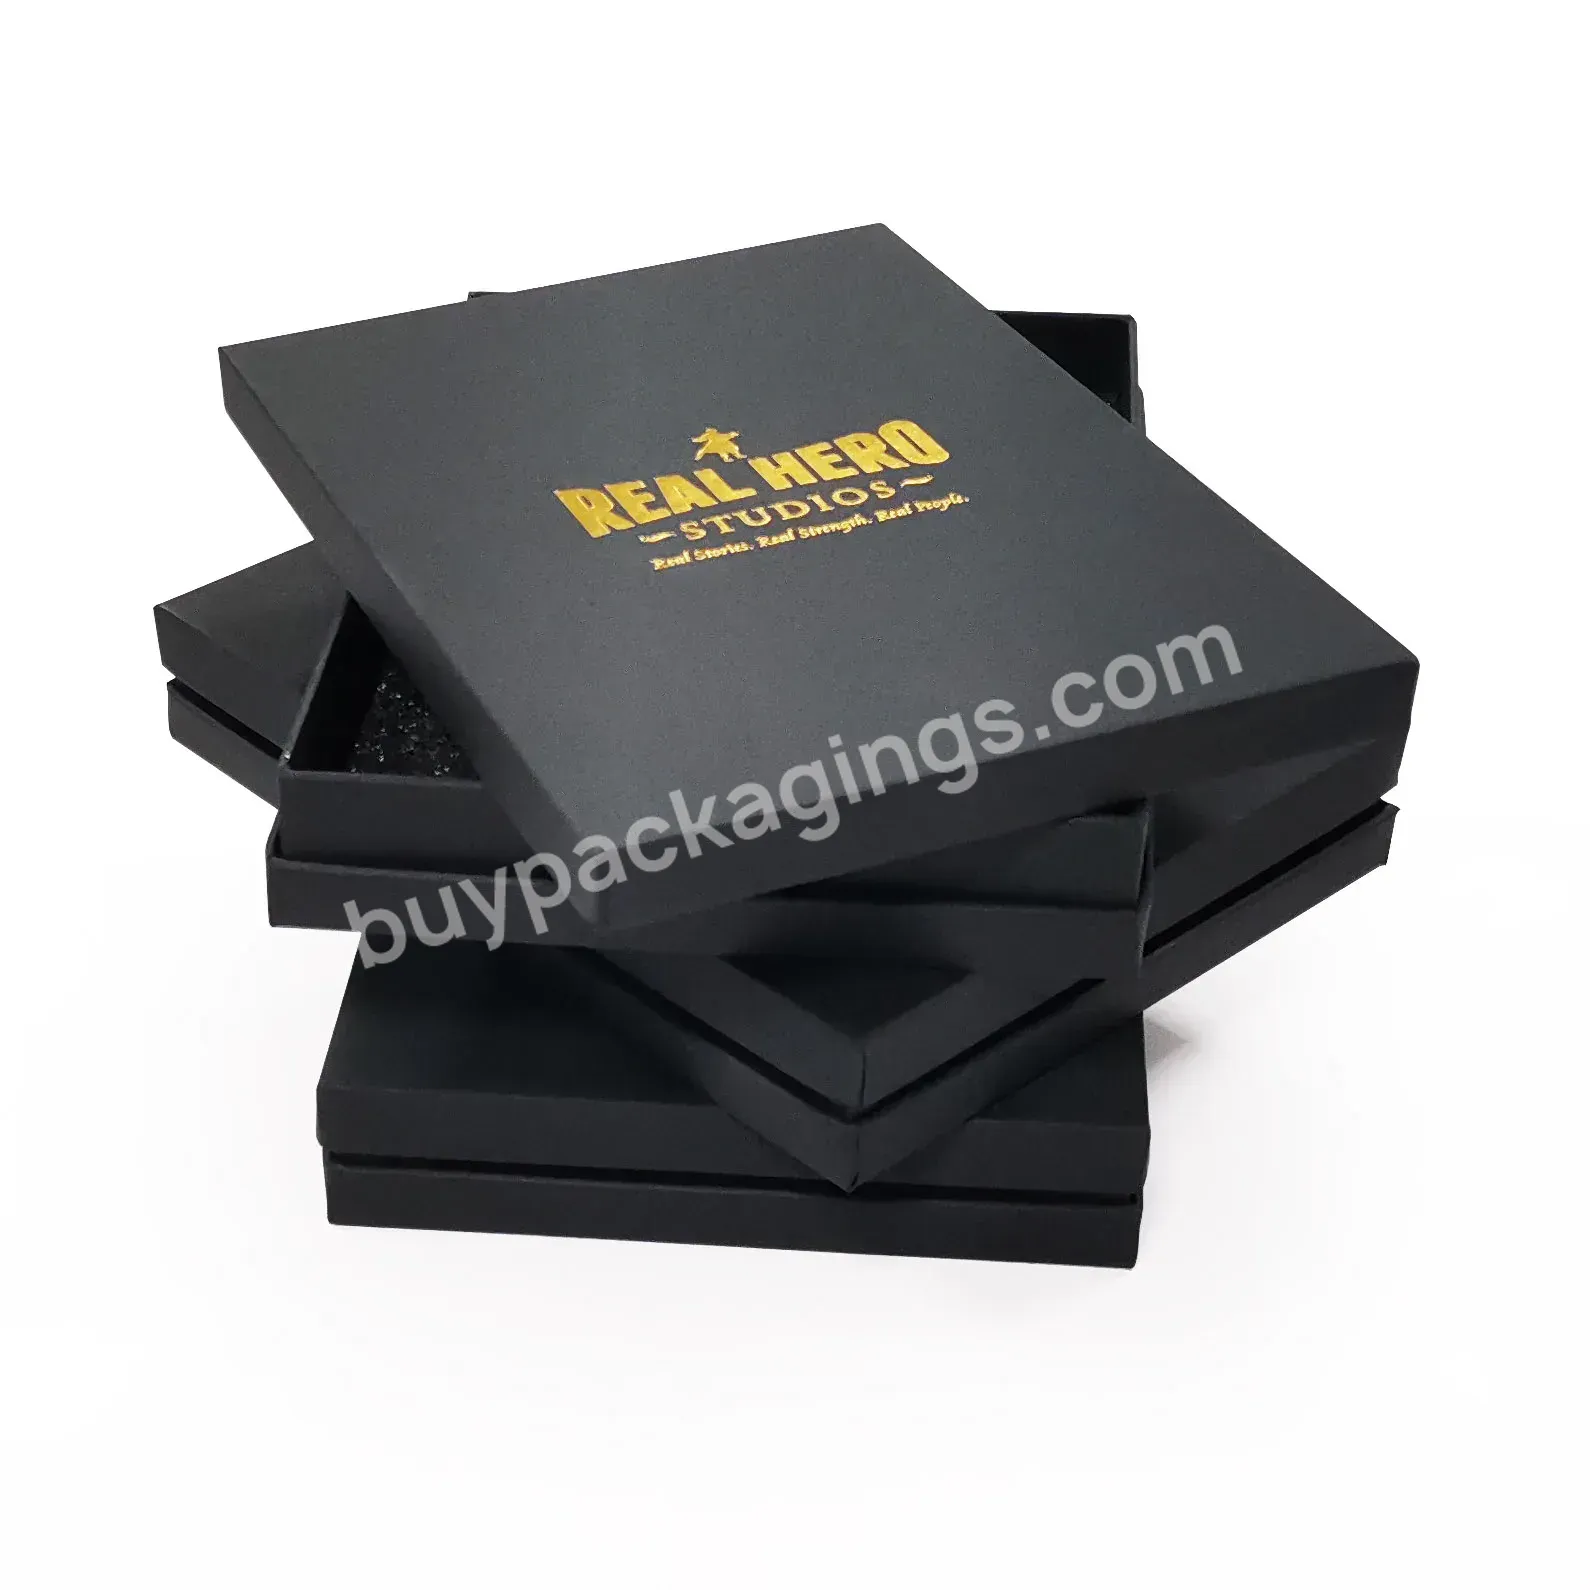 Free Sample Gift Box High Quality Heaven And Earth Cover Box Gold Foil Logo Packaging - Buy Heaven And Earth Gift Box,Jewelry Cosmetic Gift,Luxury Emerald Gold Foil.